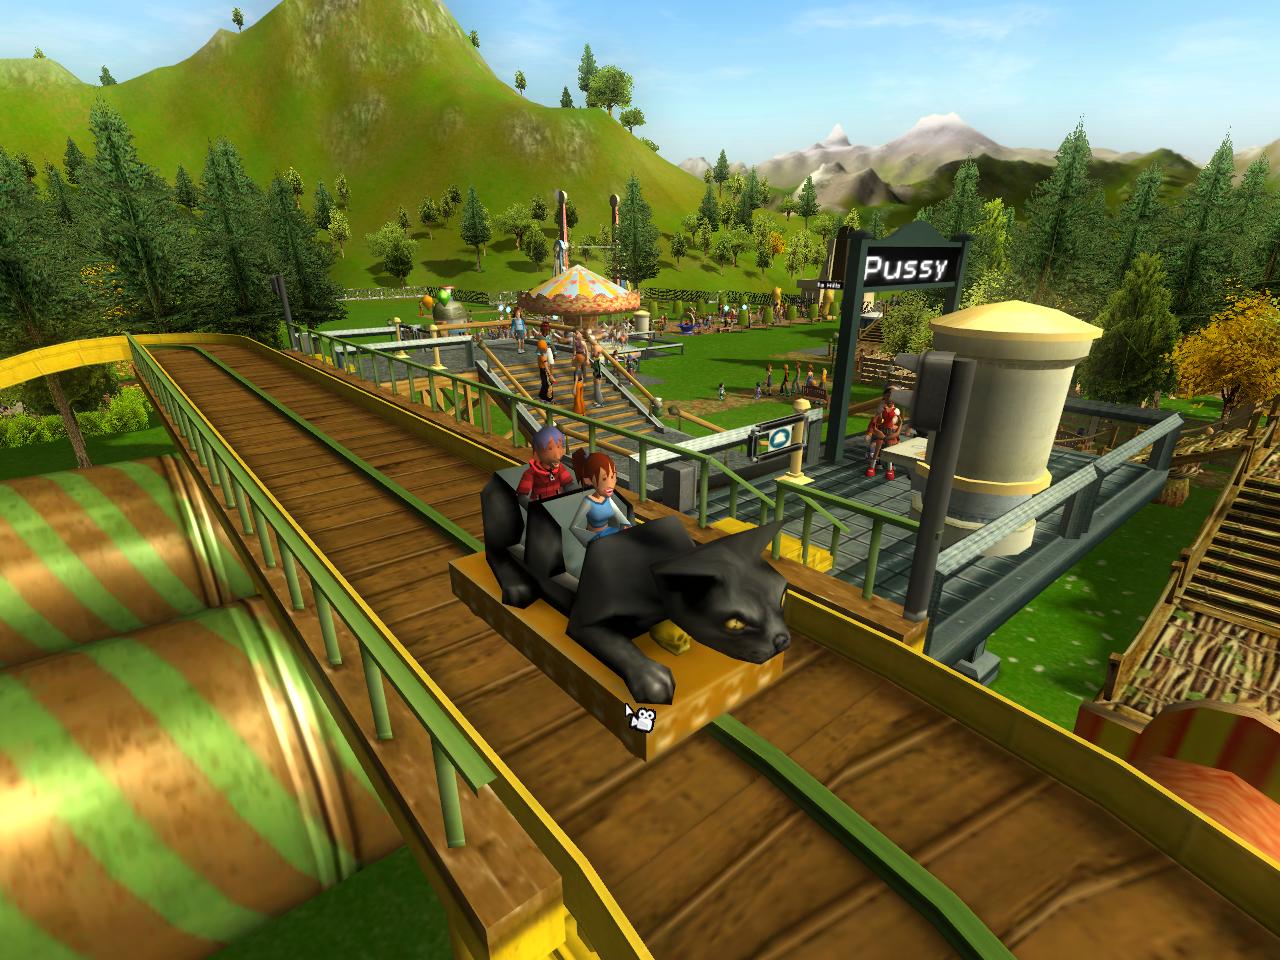 RollerCoaster Tycoon 3 Download (2004 Strategy Game)